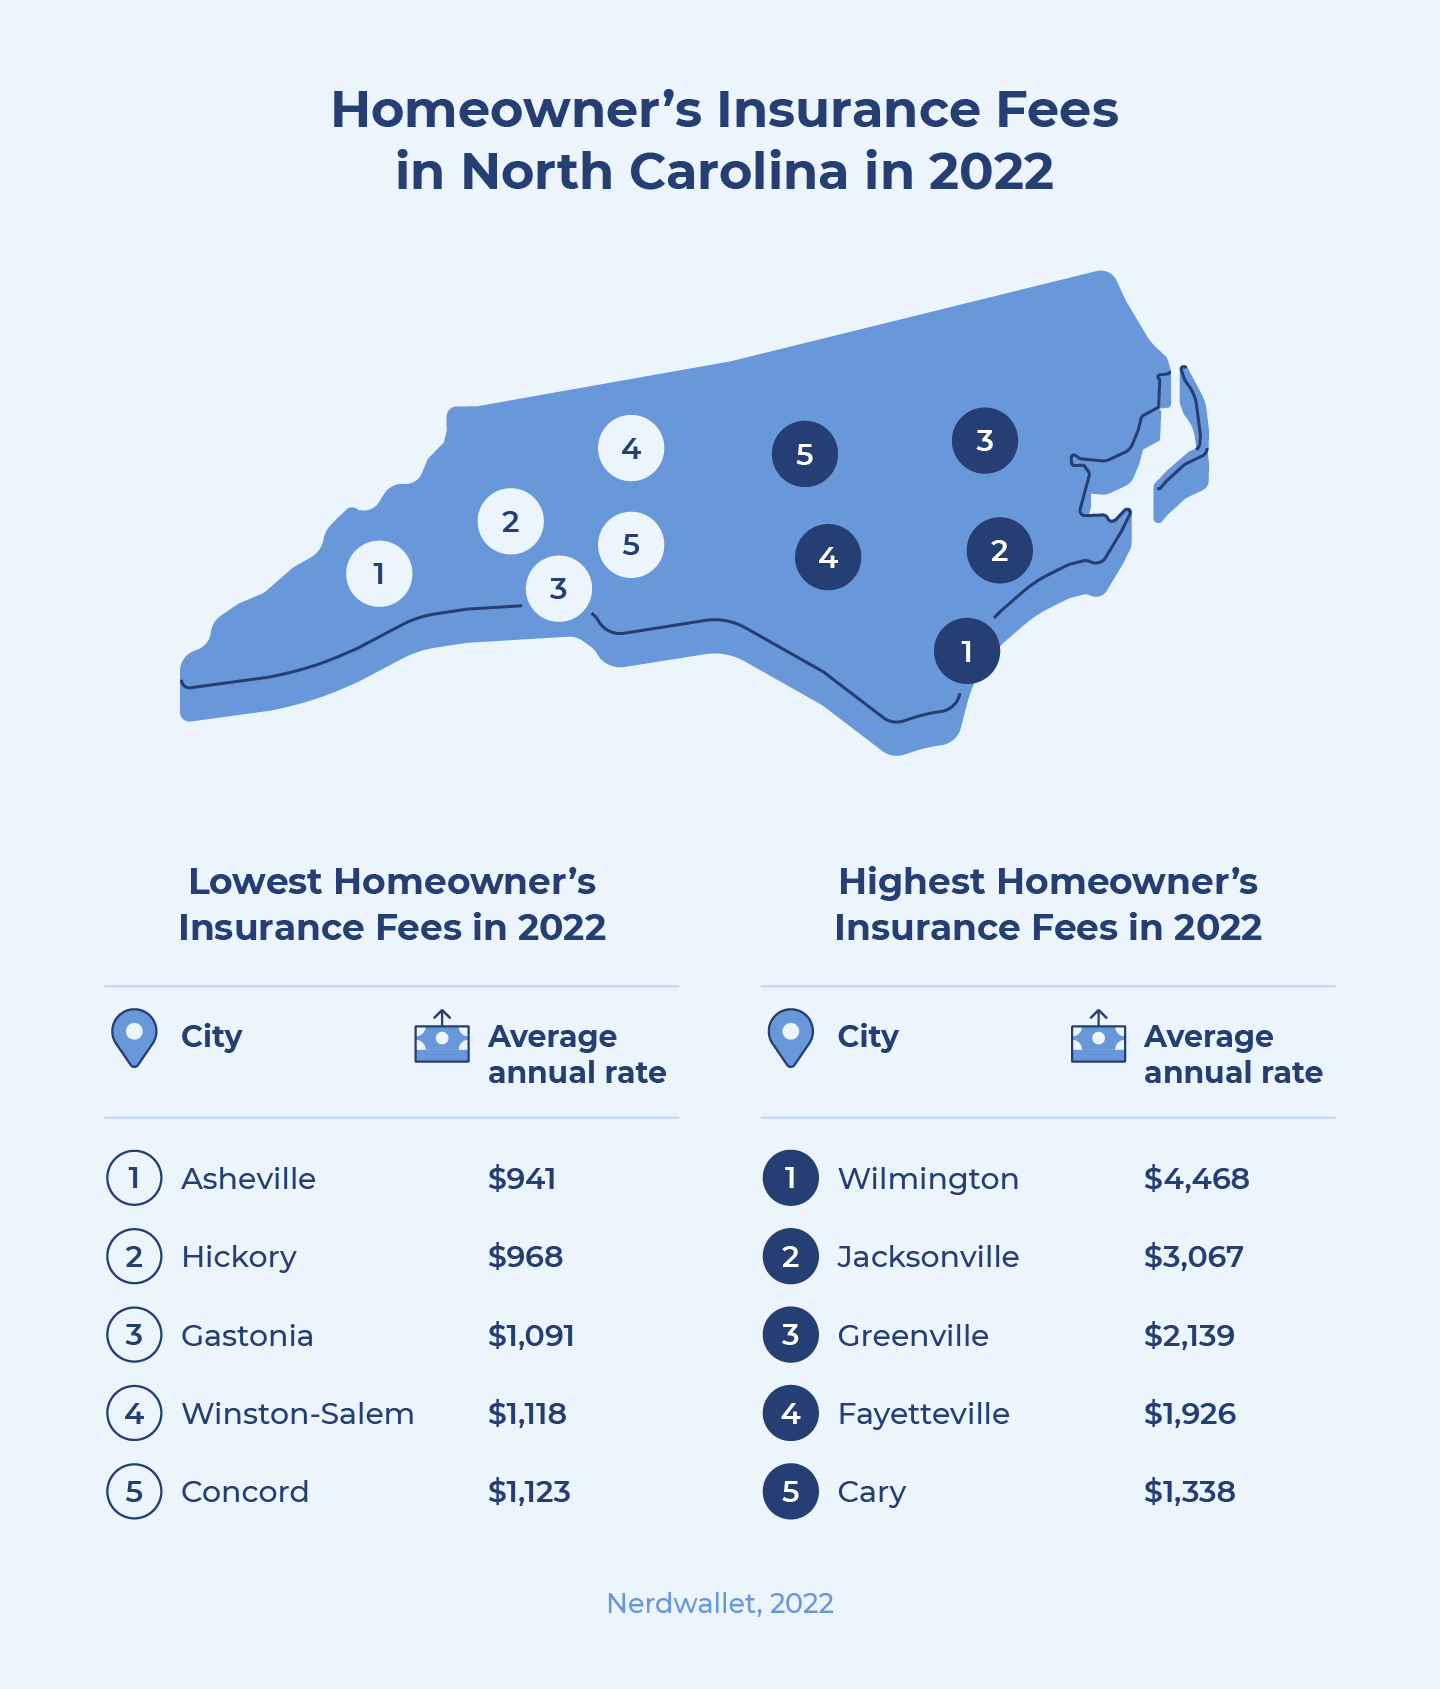 The lowest homeowner's insurance fees in North Carolina are in Asheville, Hickory, Gastonia, Winston-Salem, and Concord. The highest are in Wilmington, Jacksonville, Greenville, Fayetteville, and Cary.